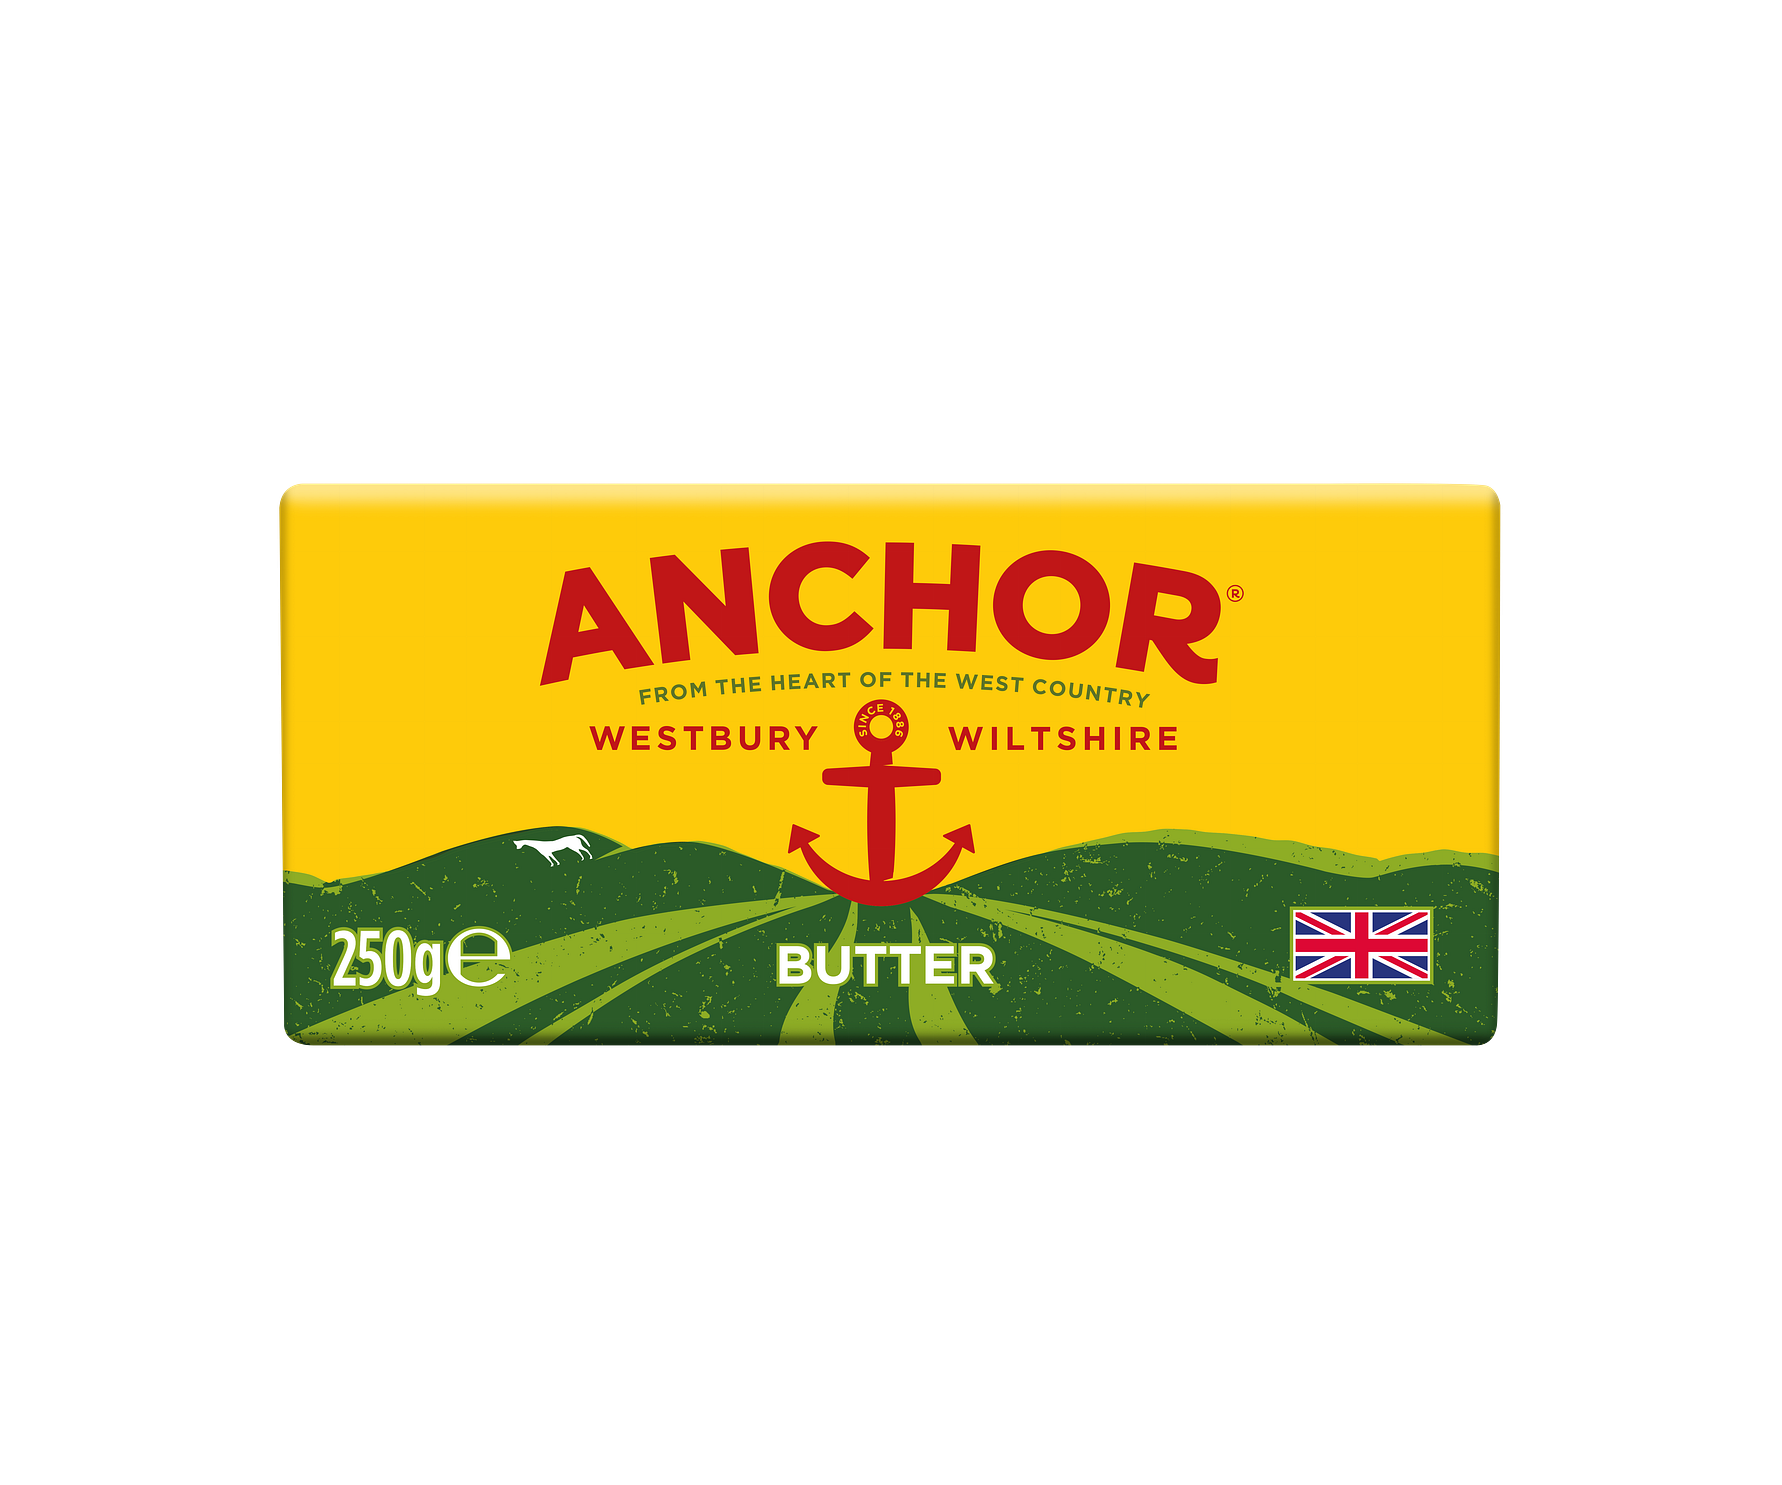 Anchor crowned Brand of the Year at the Grocer Gold Awards